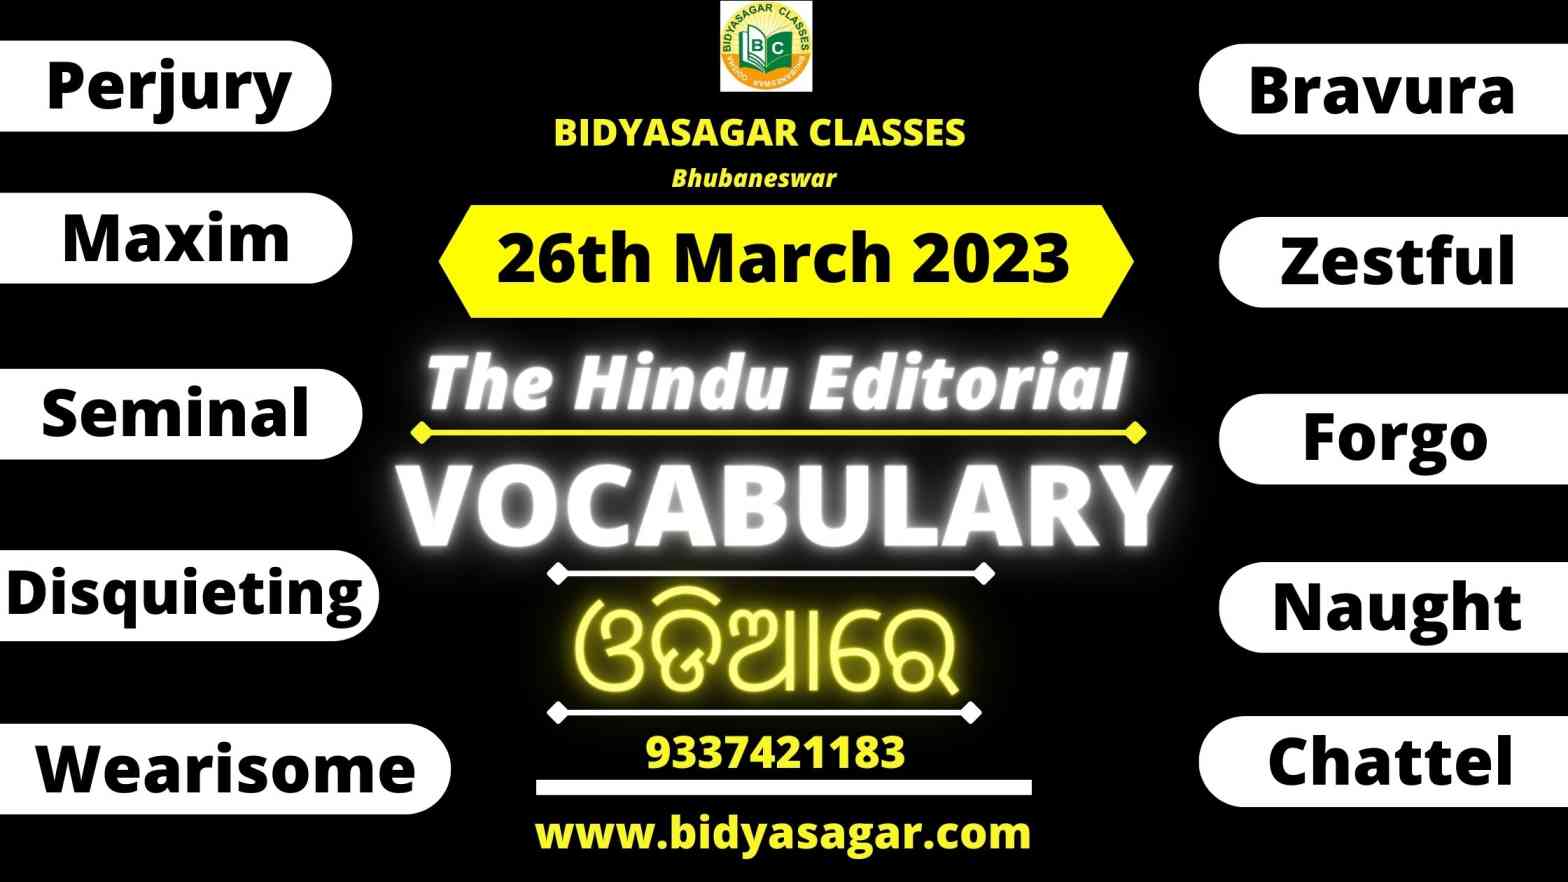 The Hindu Editorial Vocabulary of 26th March 2023